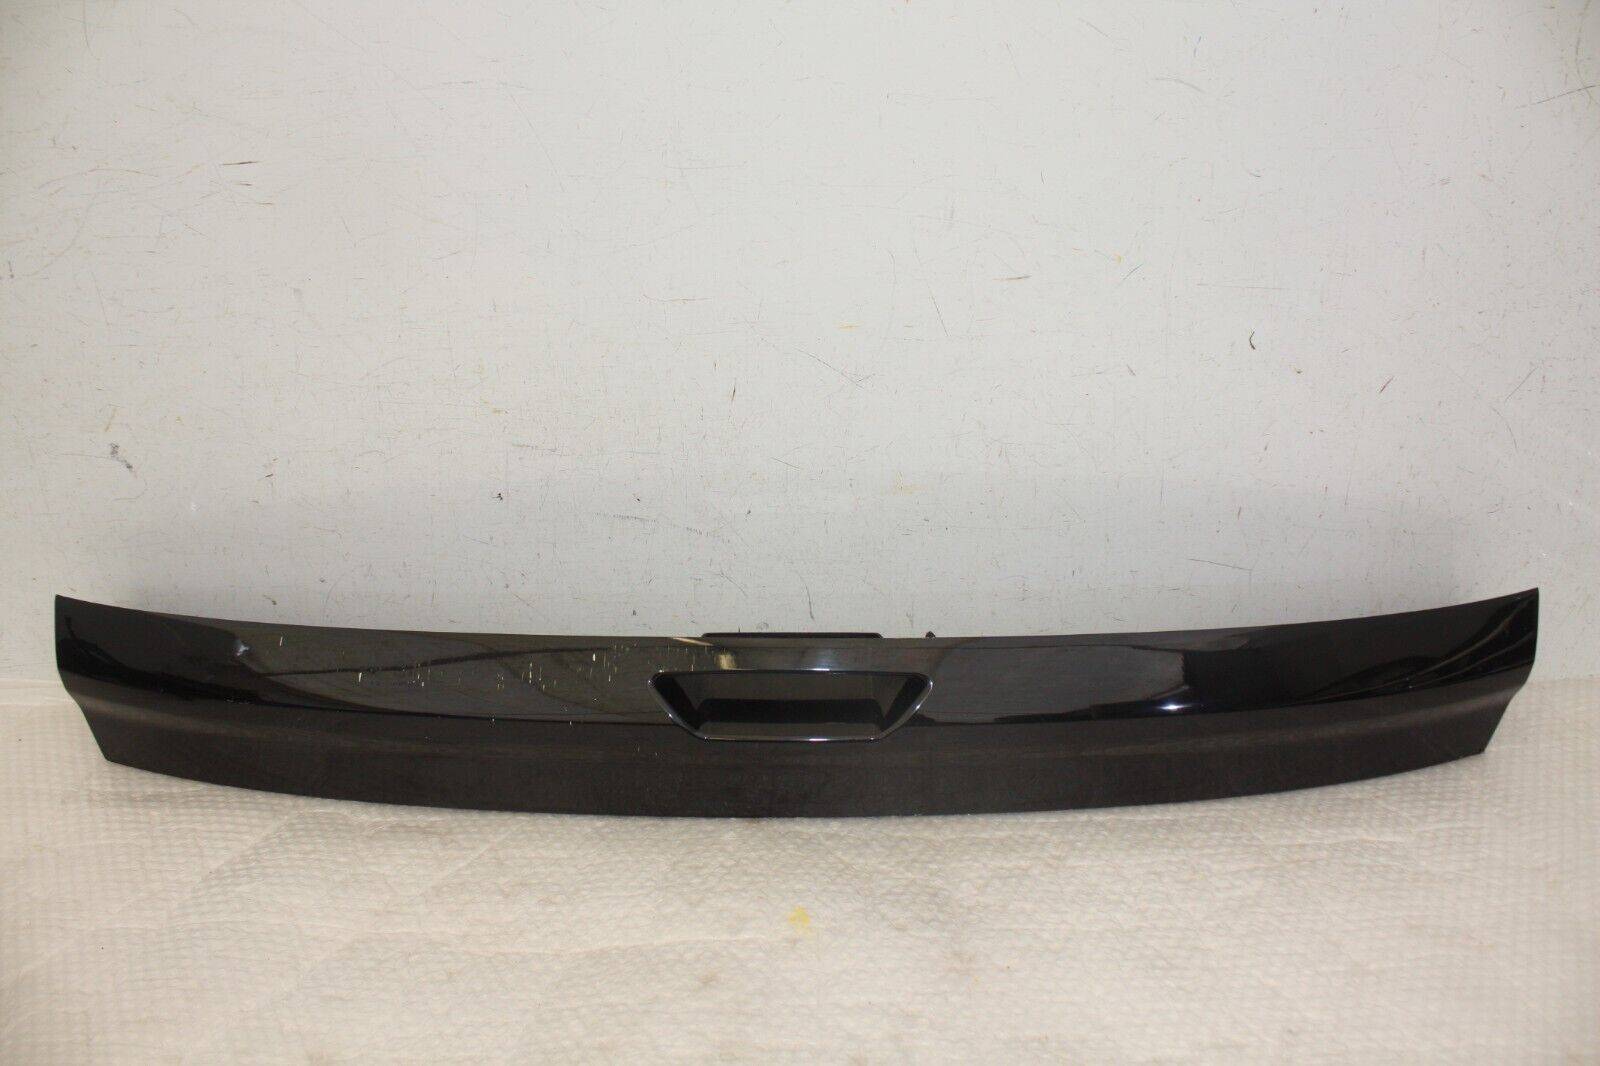 Ford Kuga Rear Tailgate Boot Cover Lower Section CJ54 S423A40 Genuine 176362627805